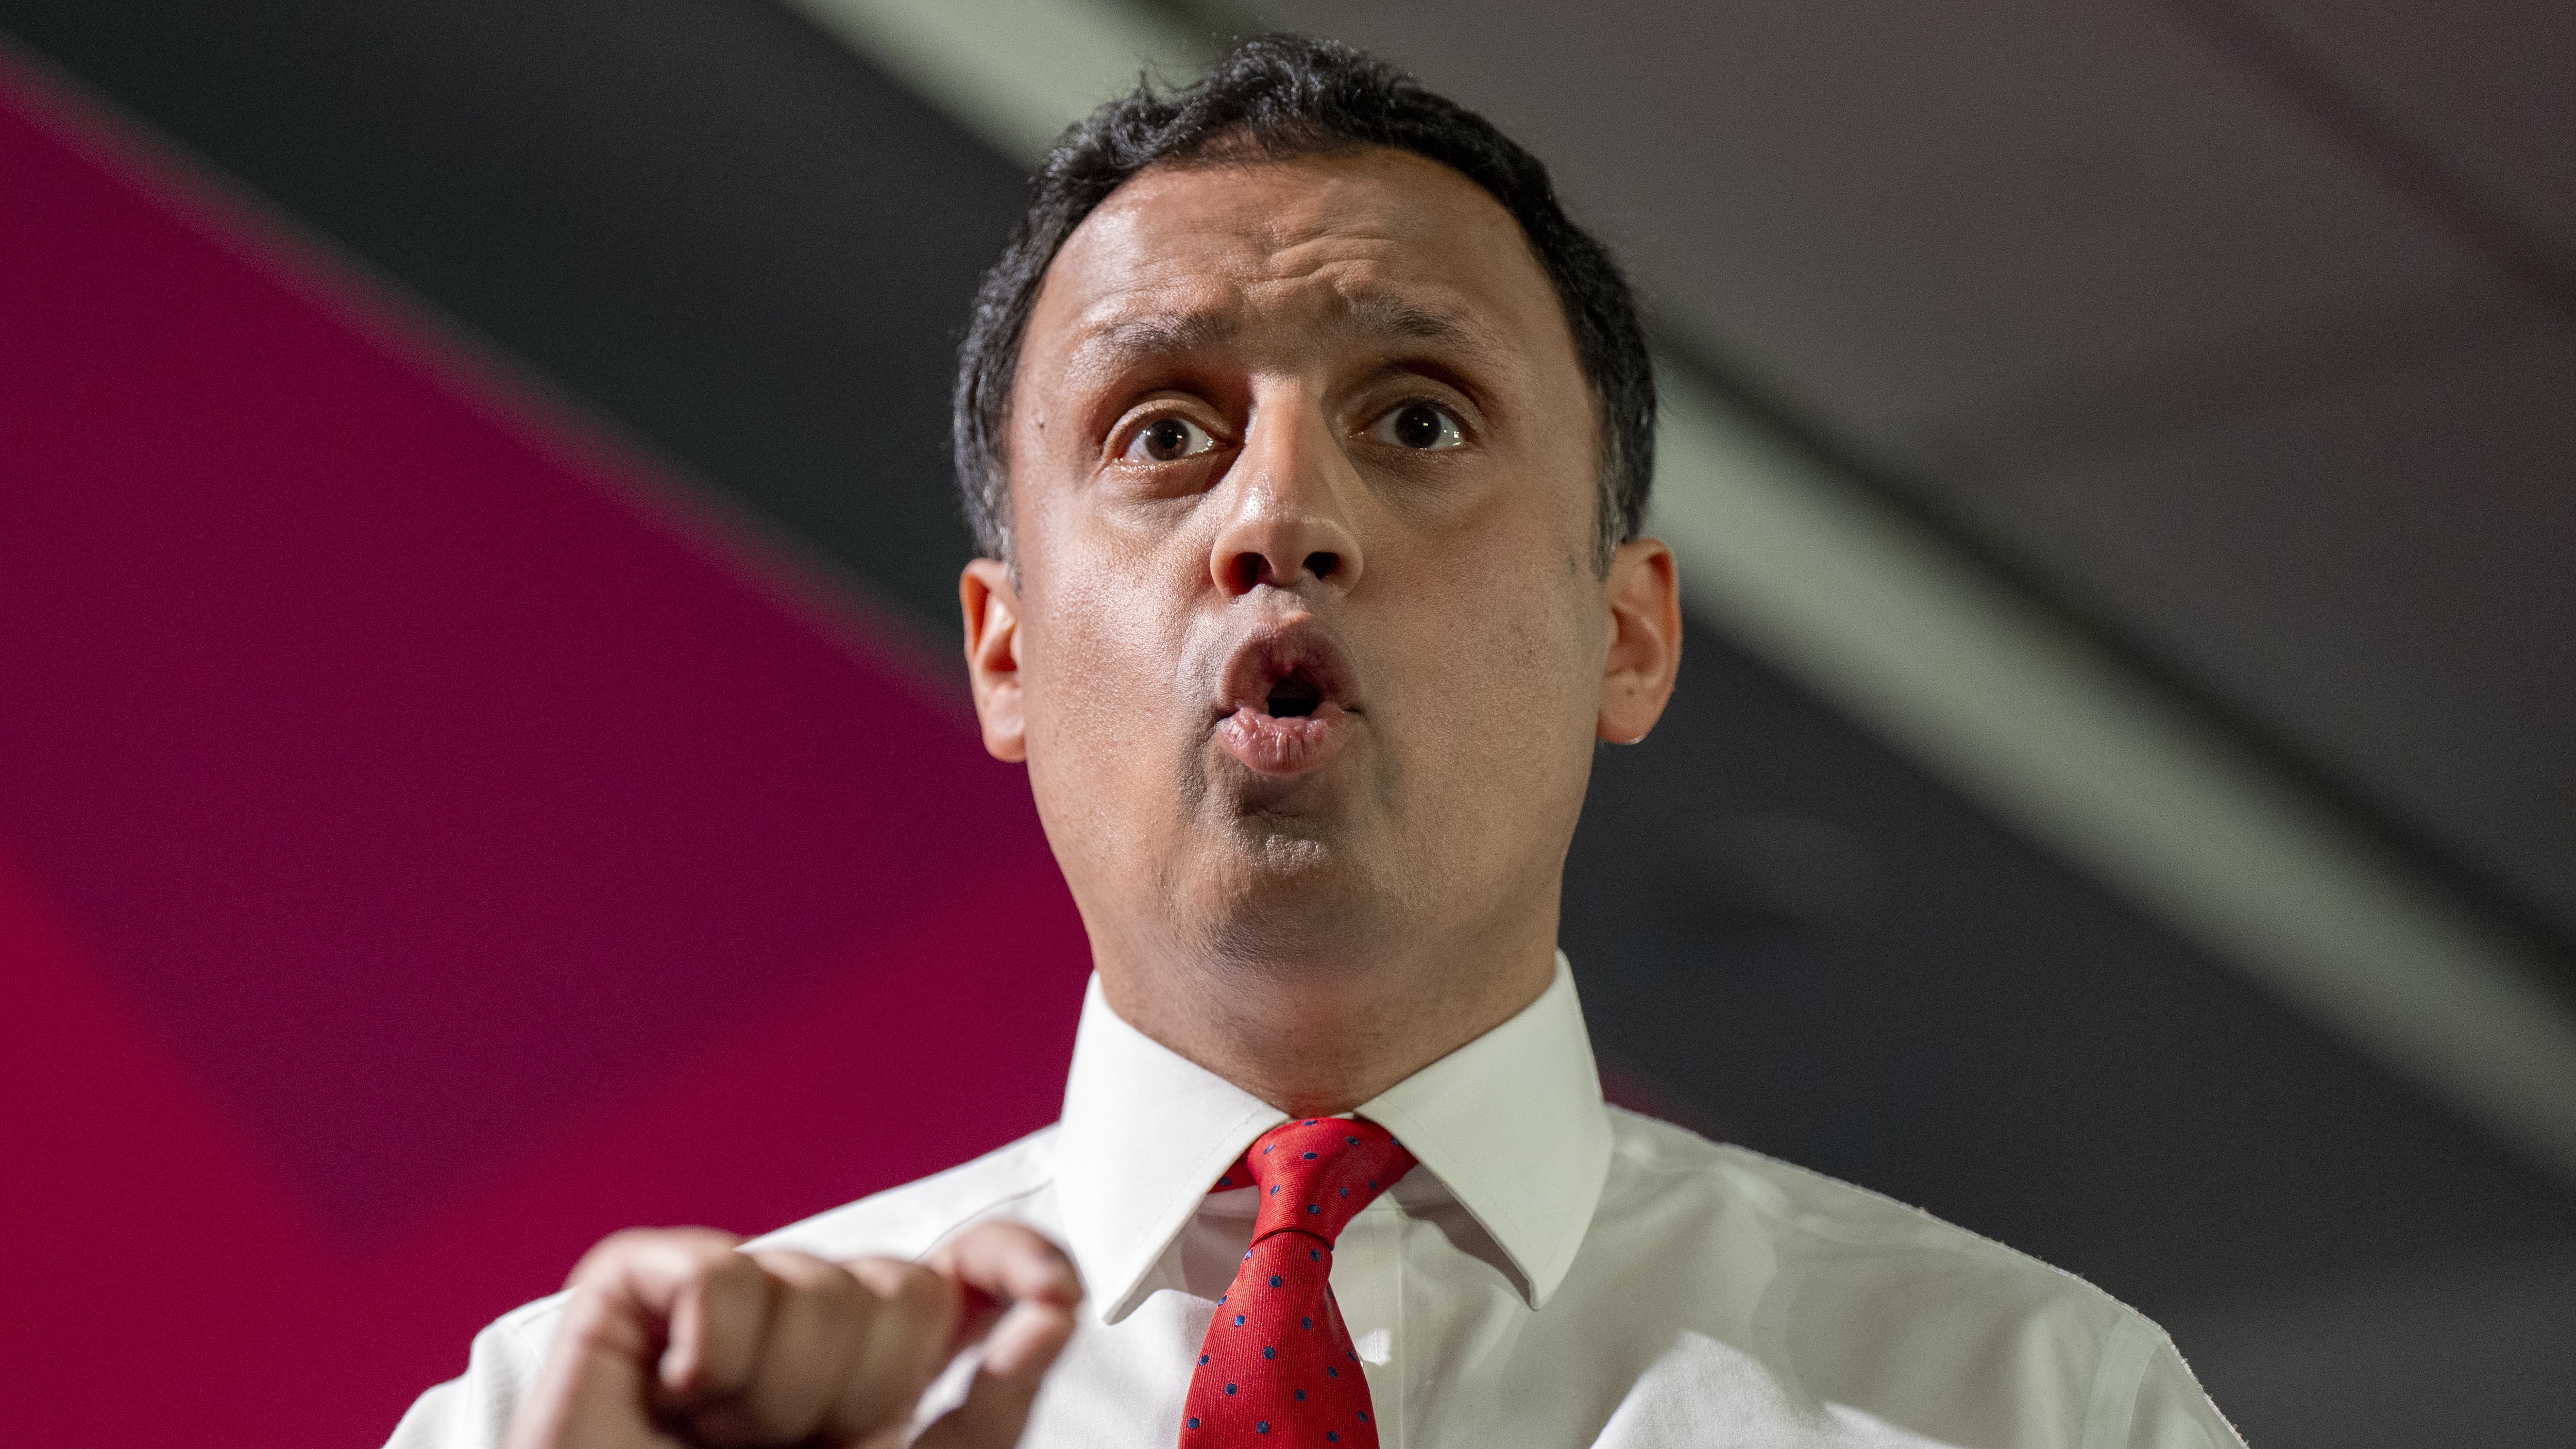 Scottish Labour leader Anas Sarwar said his party acted swiftly to suspend a candidate accused of sharing pro-Russian content.